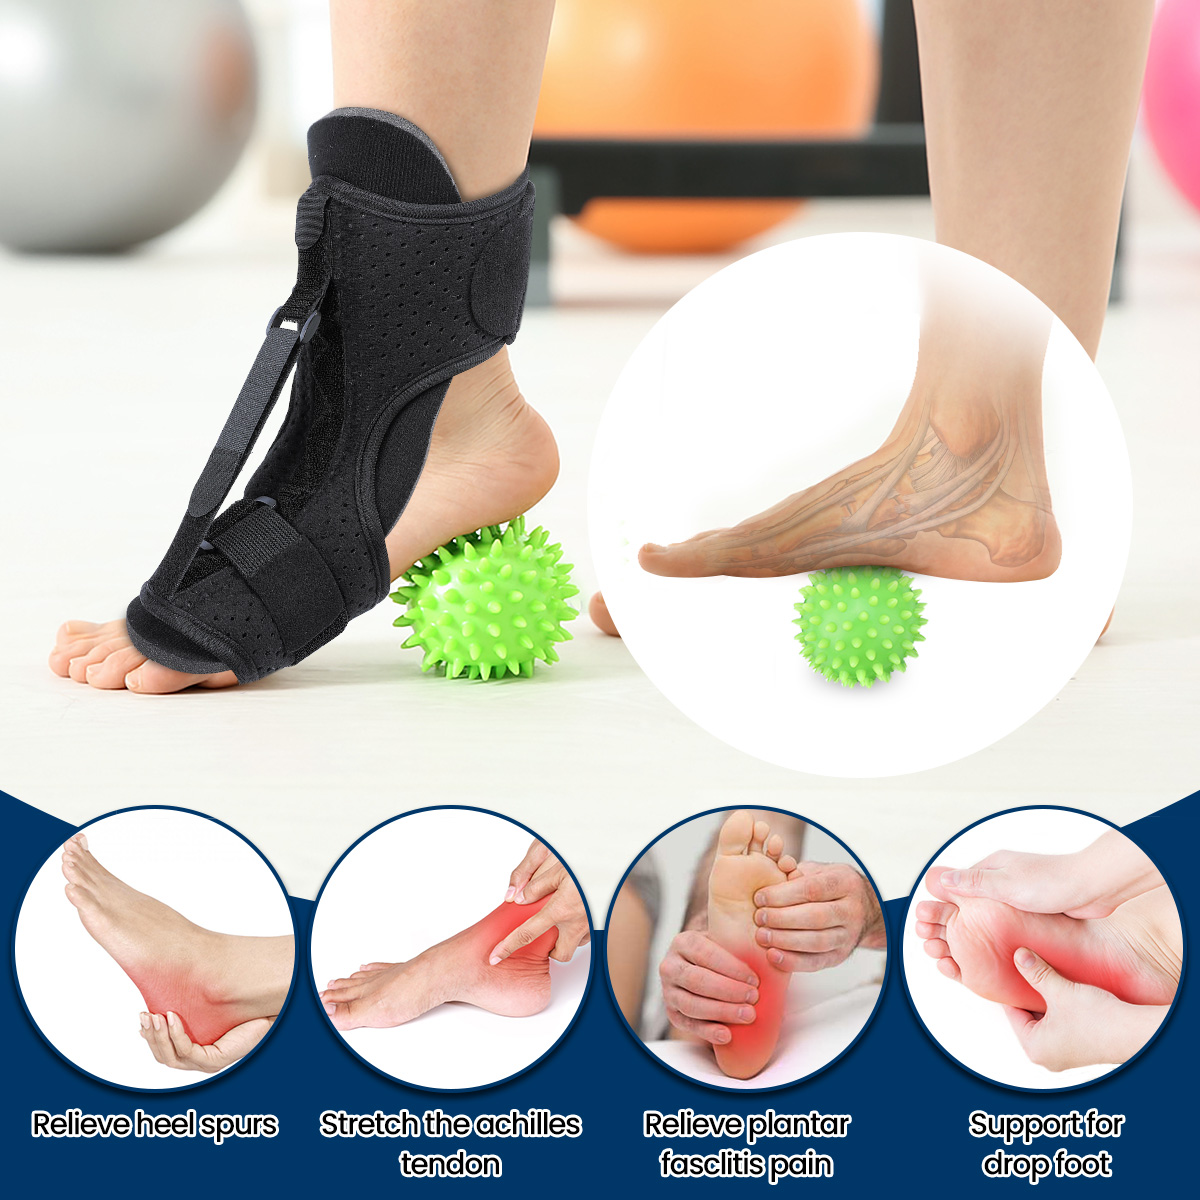 OUTERDO-Foot-Drop-Orthosis-with-Fitness-Ball-Adjustable-Plantar-Fasciitis-Night-Splint-Brace-Support-1891293-4